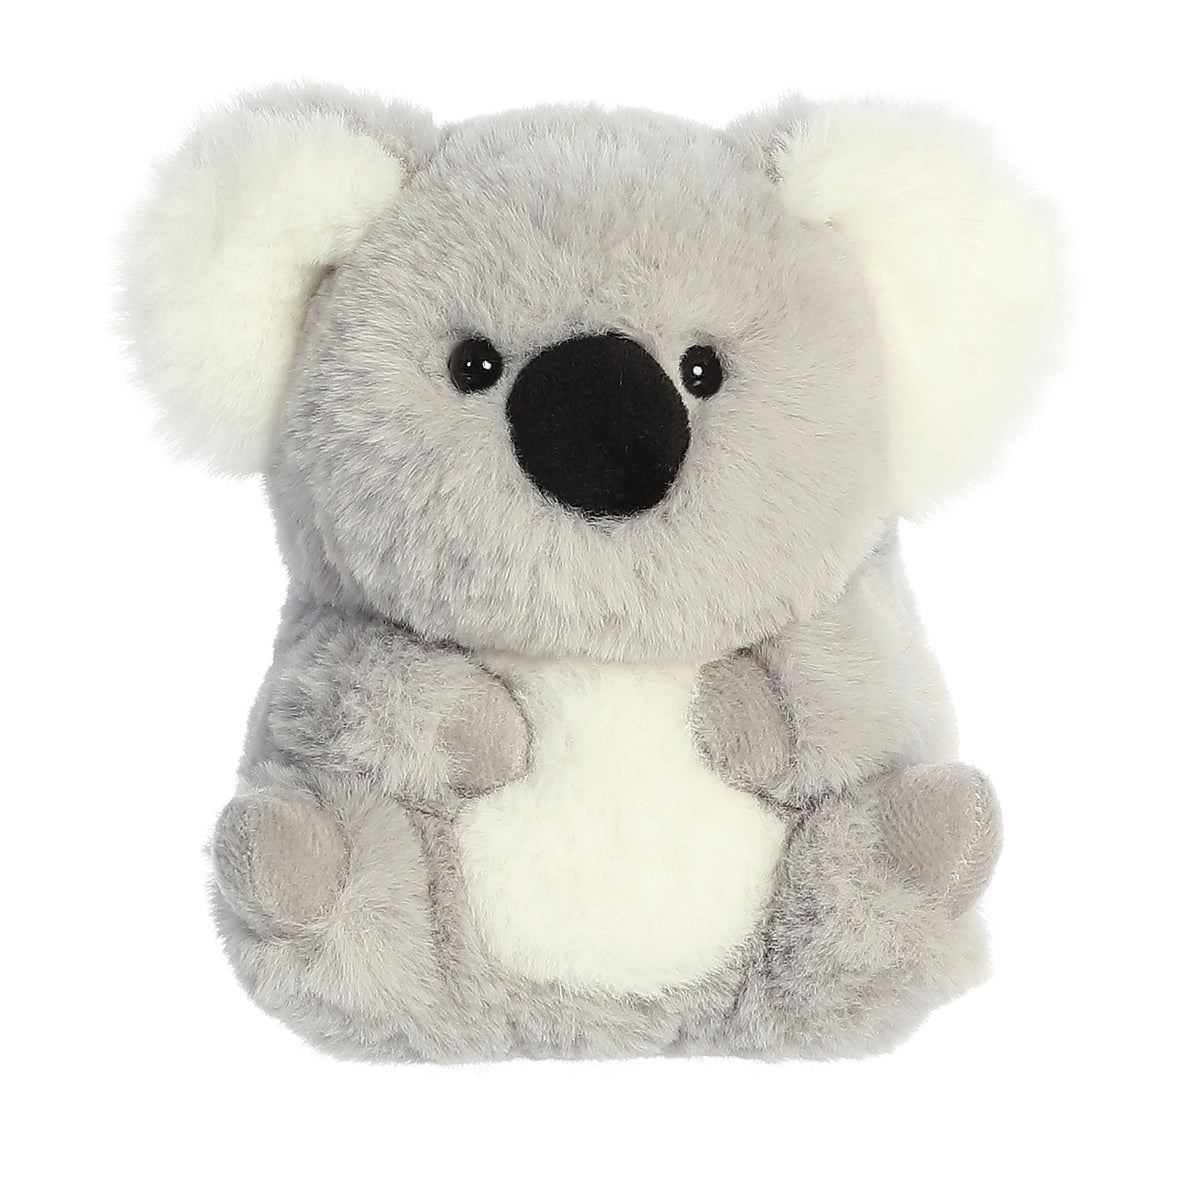 A Koala plush with extra-plush fur and charmingly oversized ears, offering a delightful dose of Australian joy and snuggles.